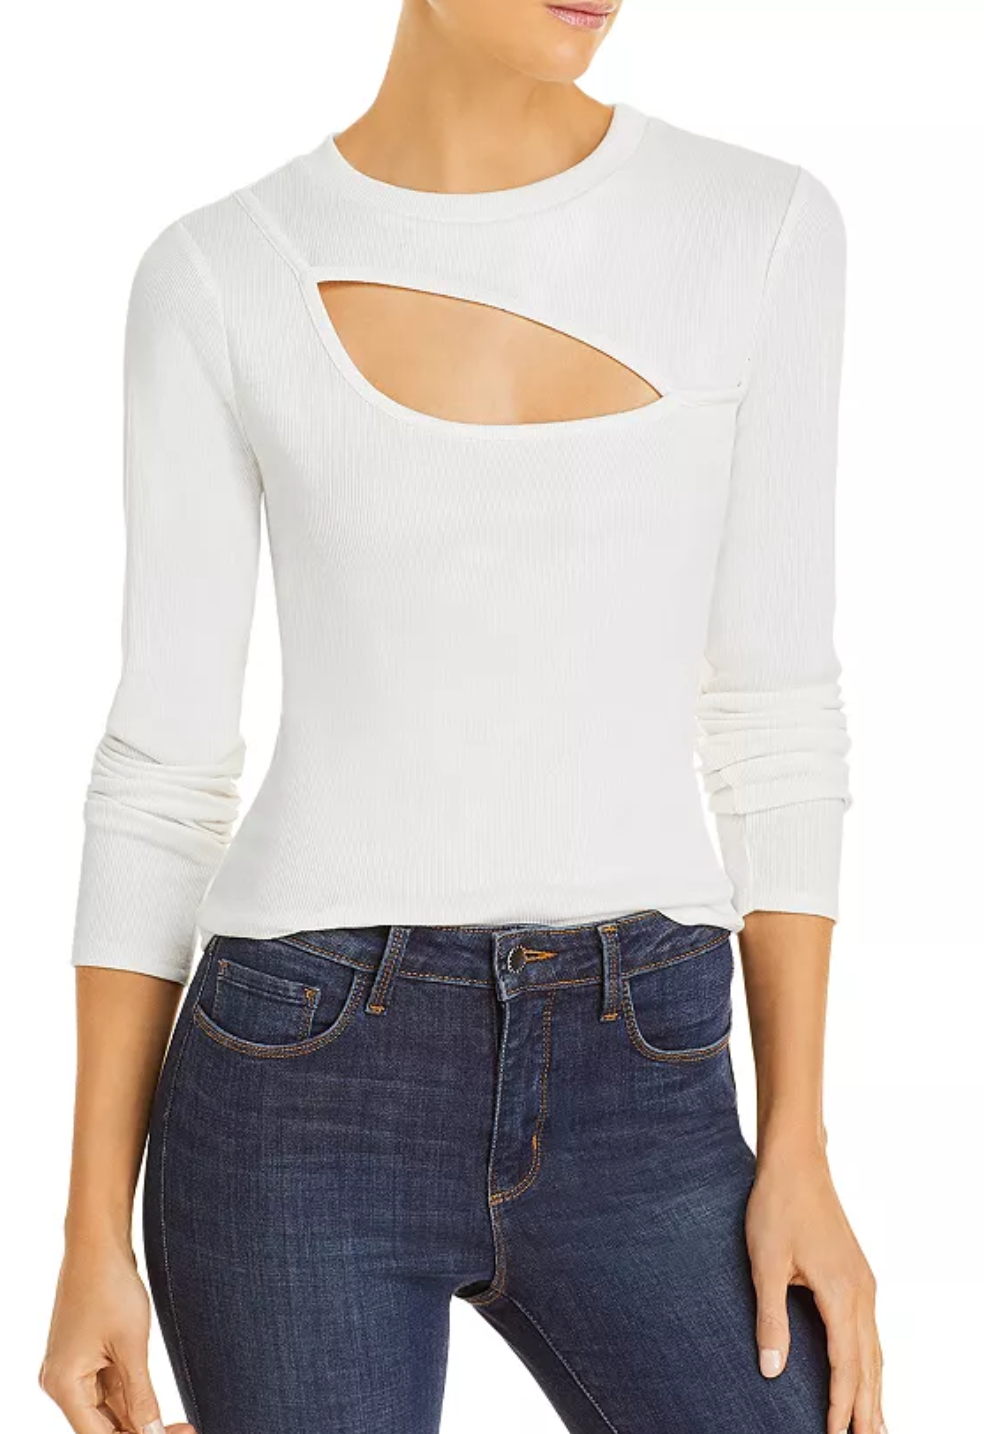 Trending! 20 Cut-Out Tops That Bring The Heat This Spring And Summer